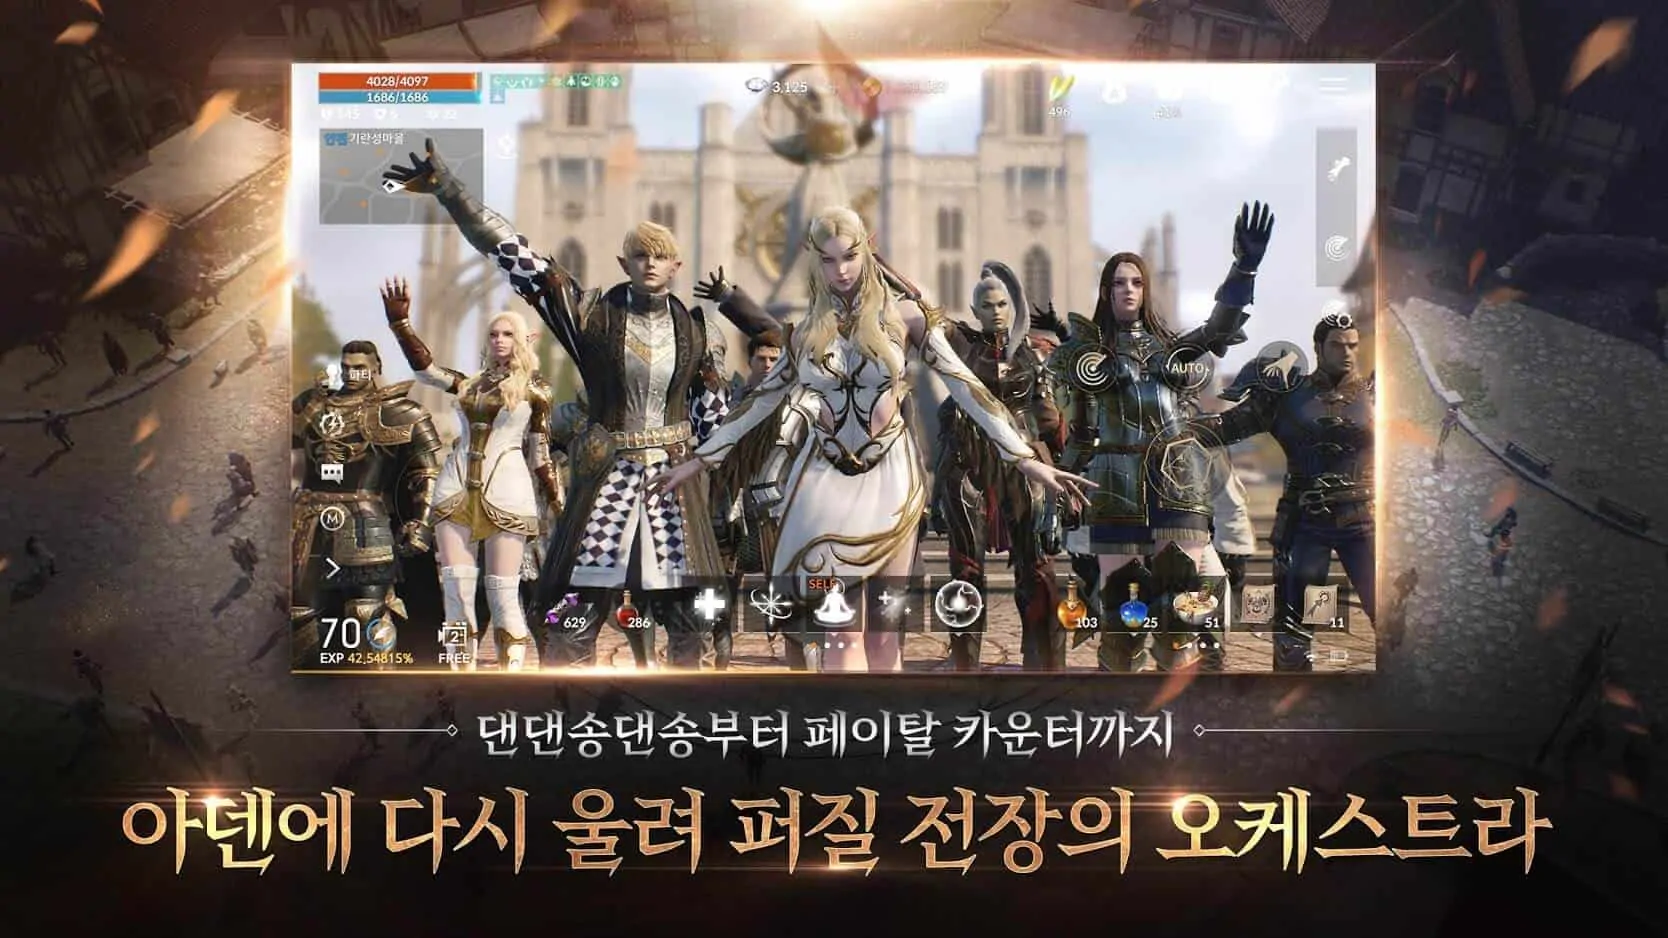 Lineage 2 M